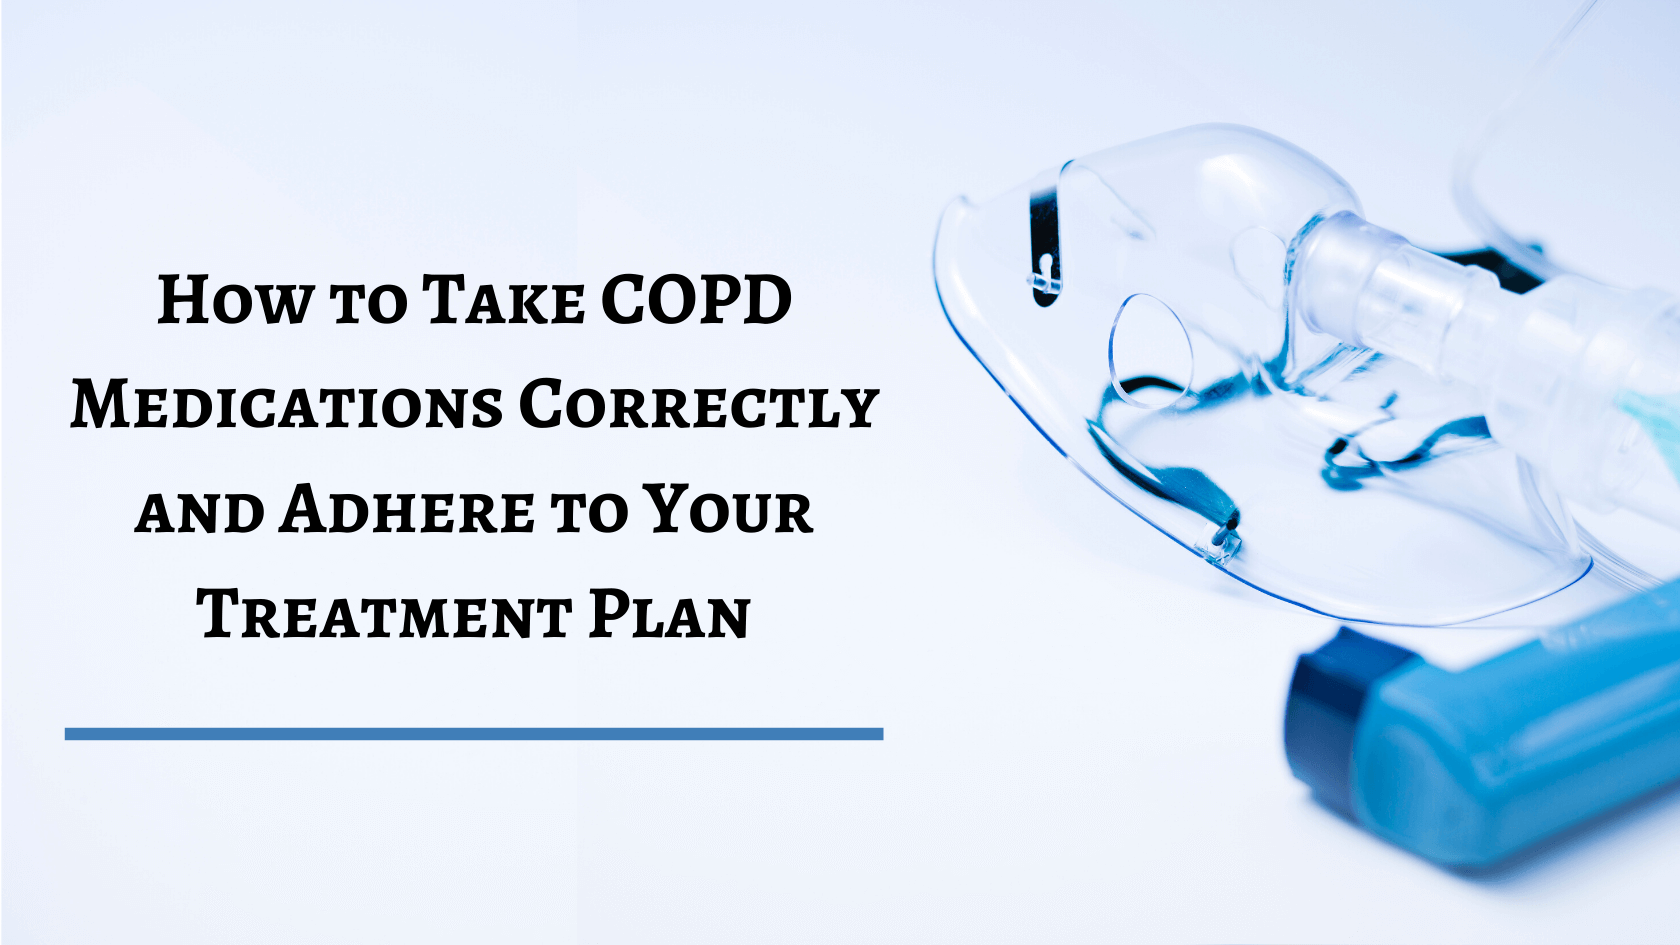 How to Take COPD Medications Correctly & Adhere to Your Treatment Plan